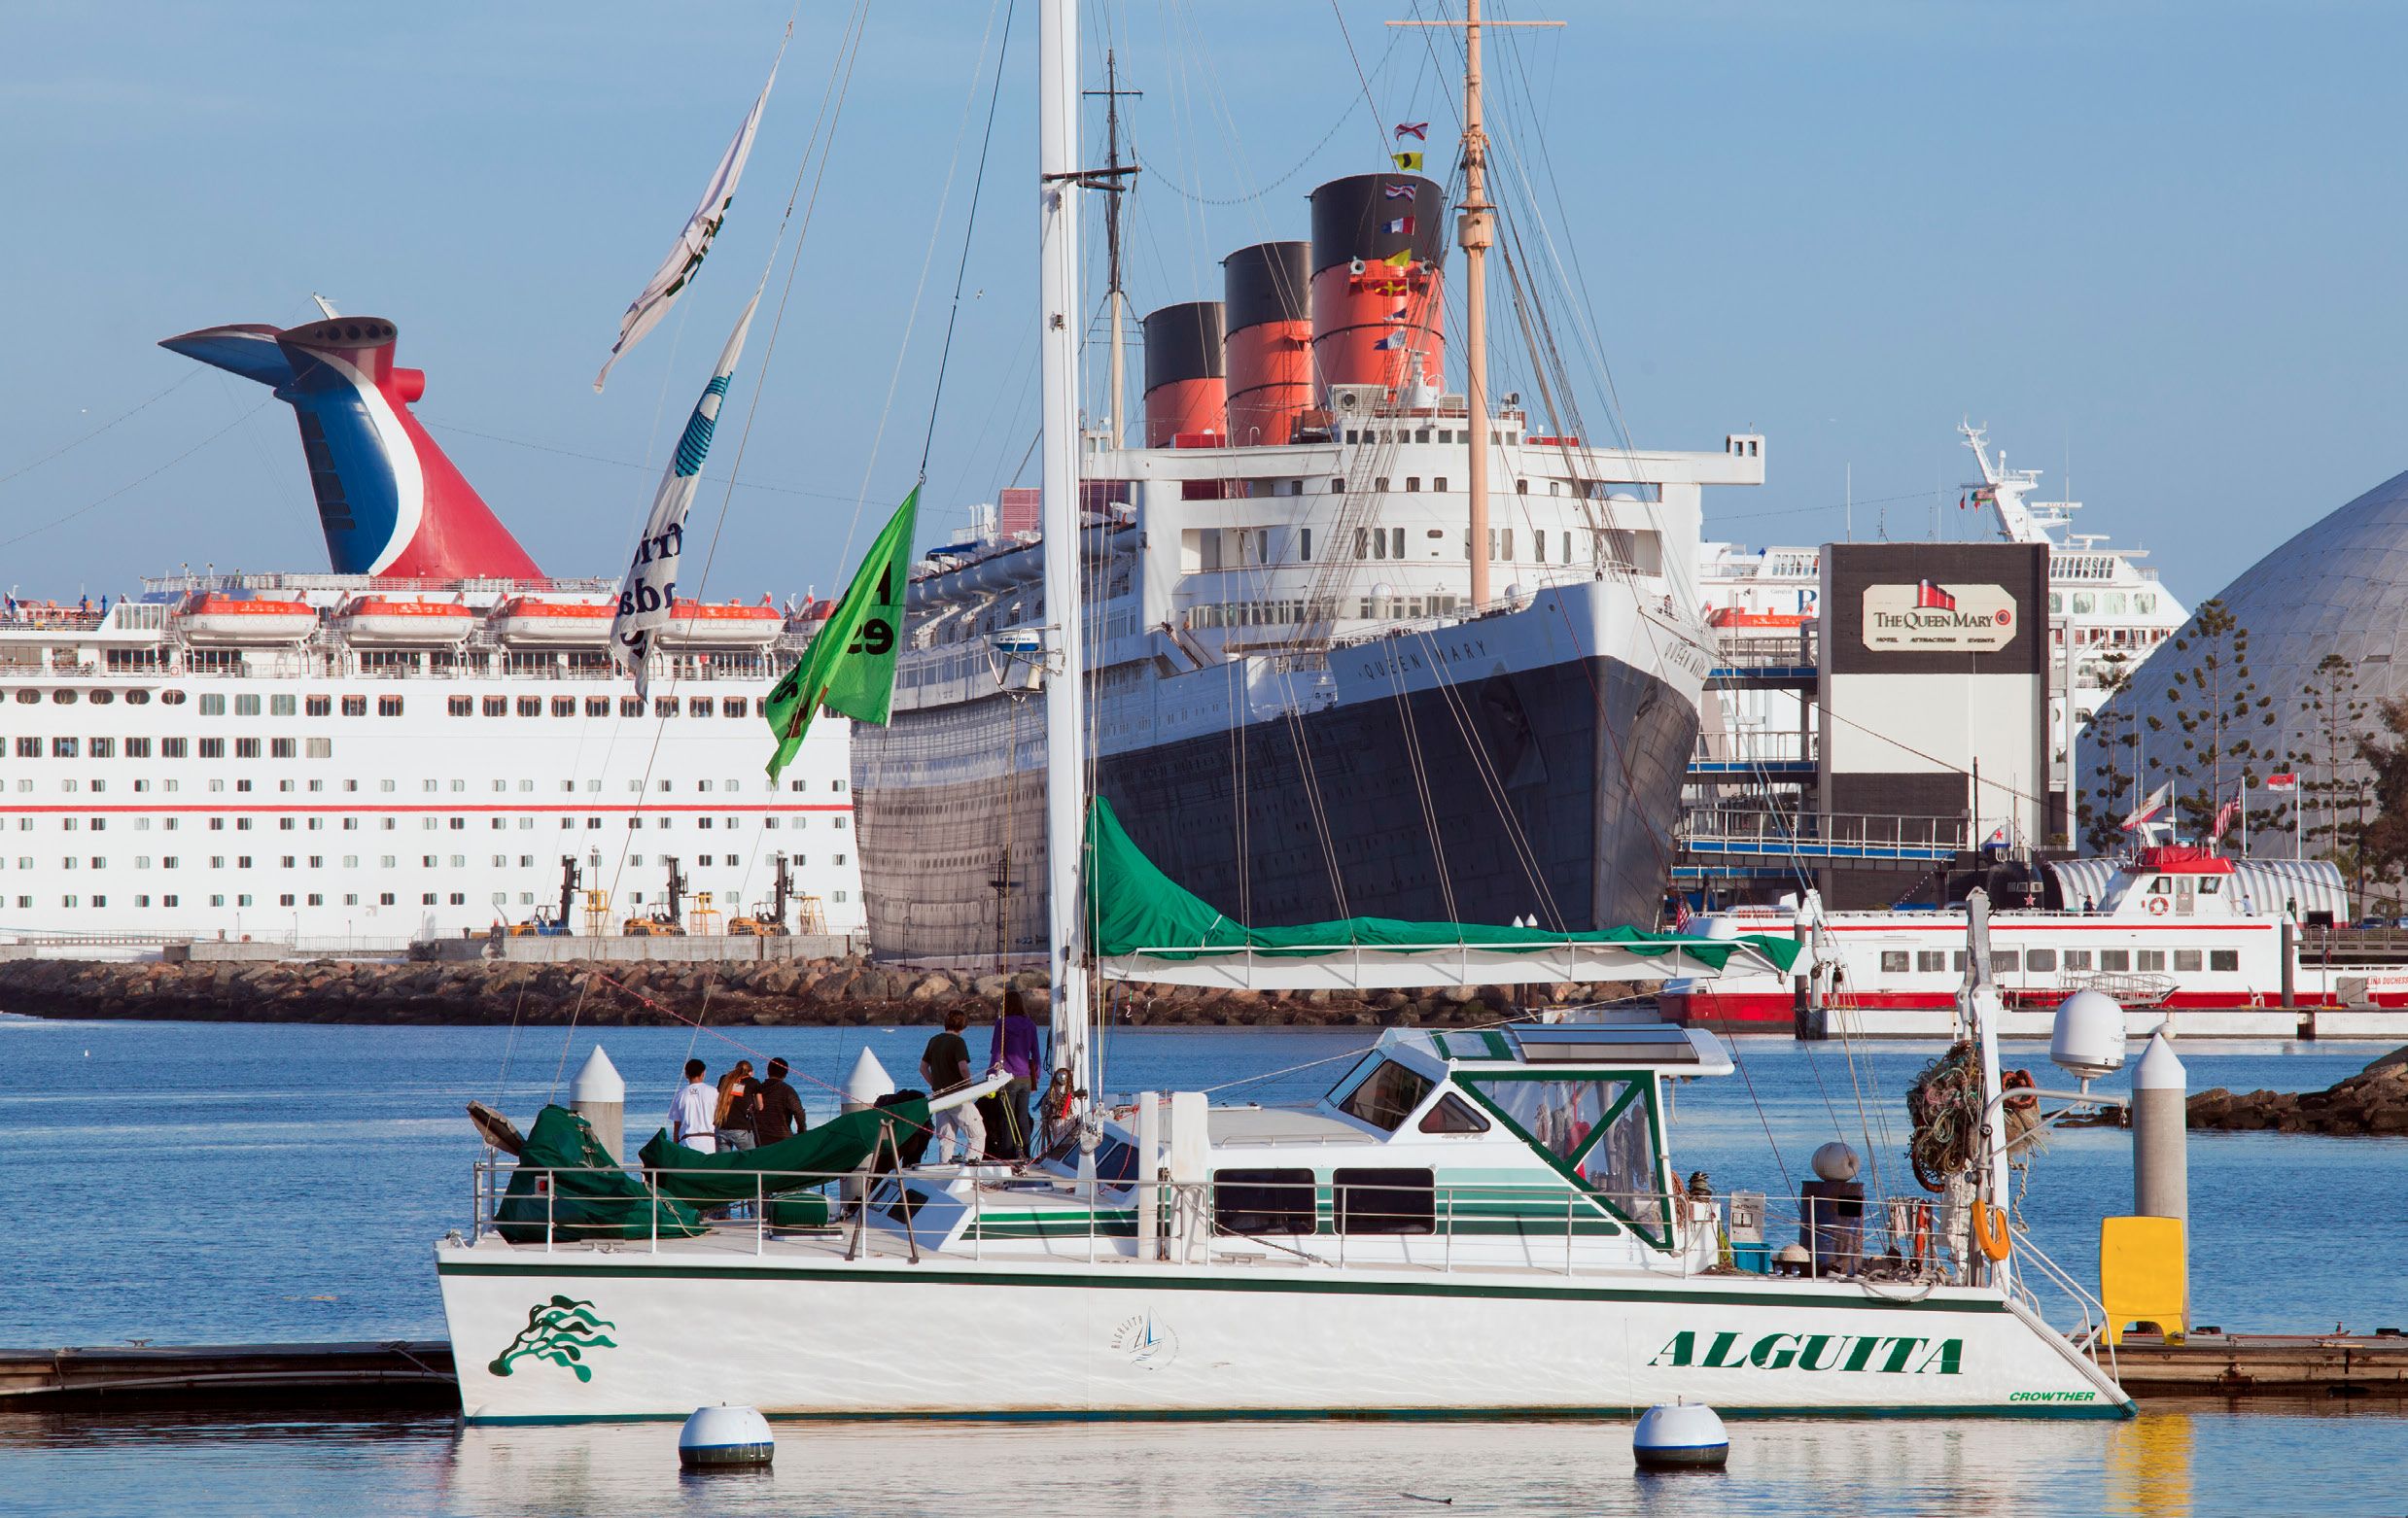 The Alguita docked in Long Beach California for a summit with students and - photo 6